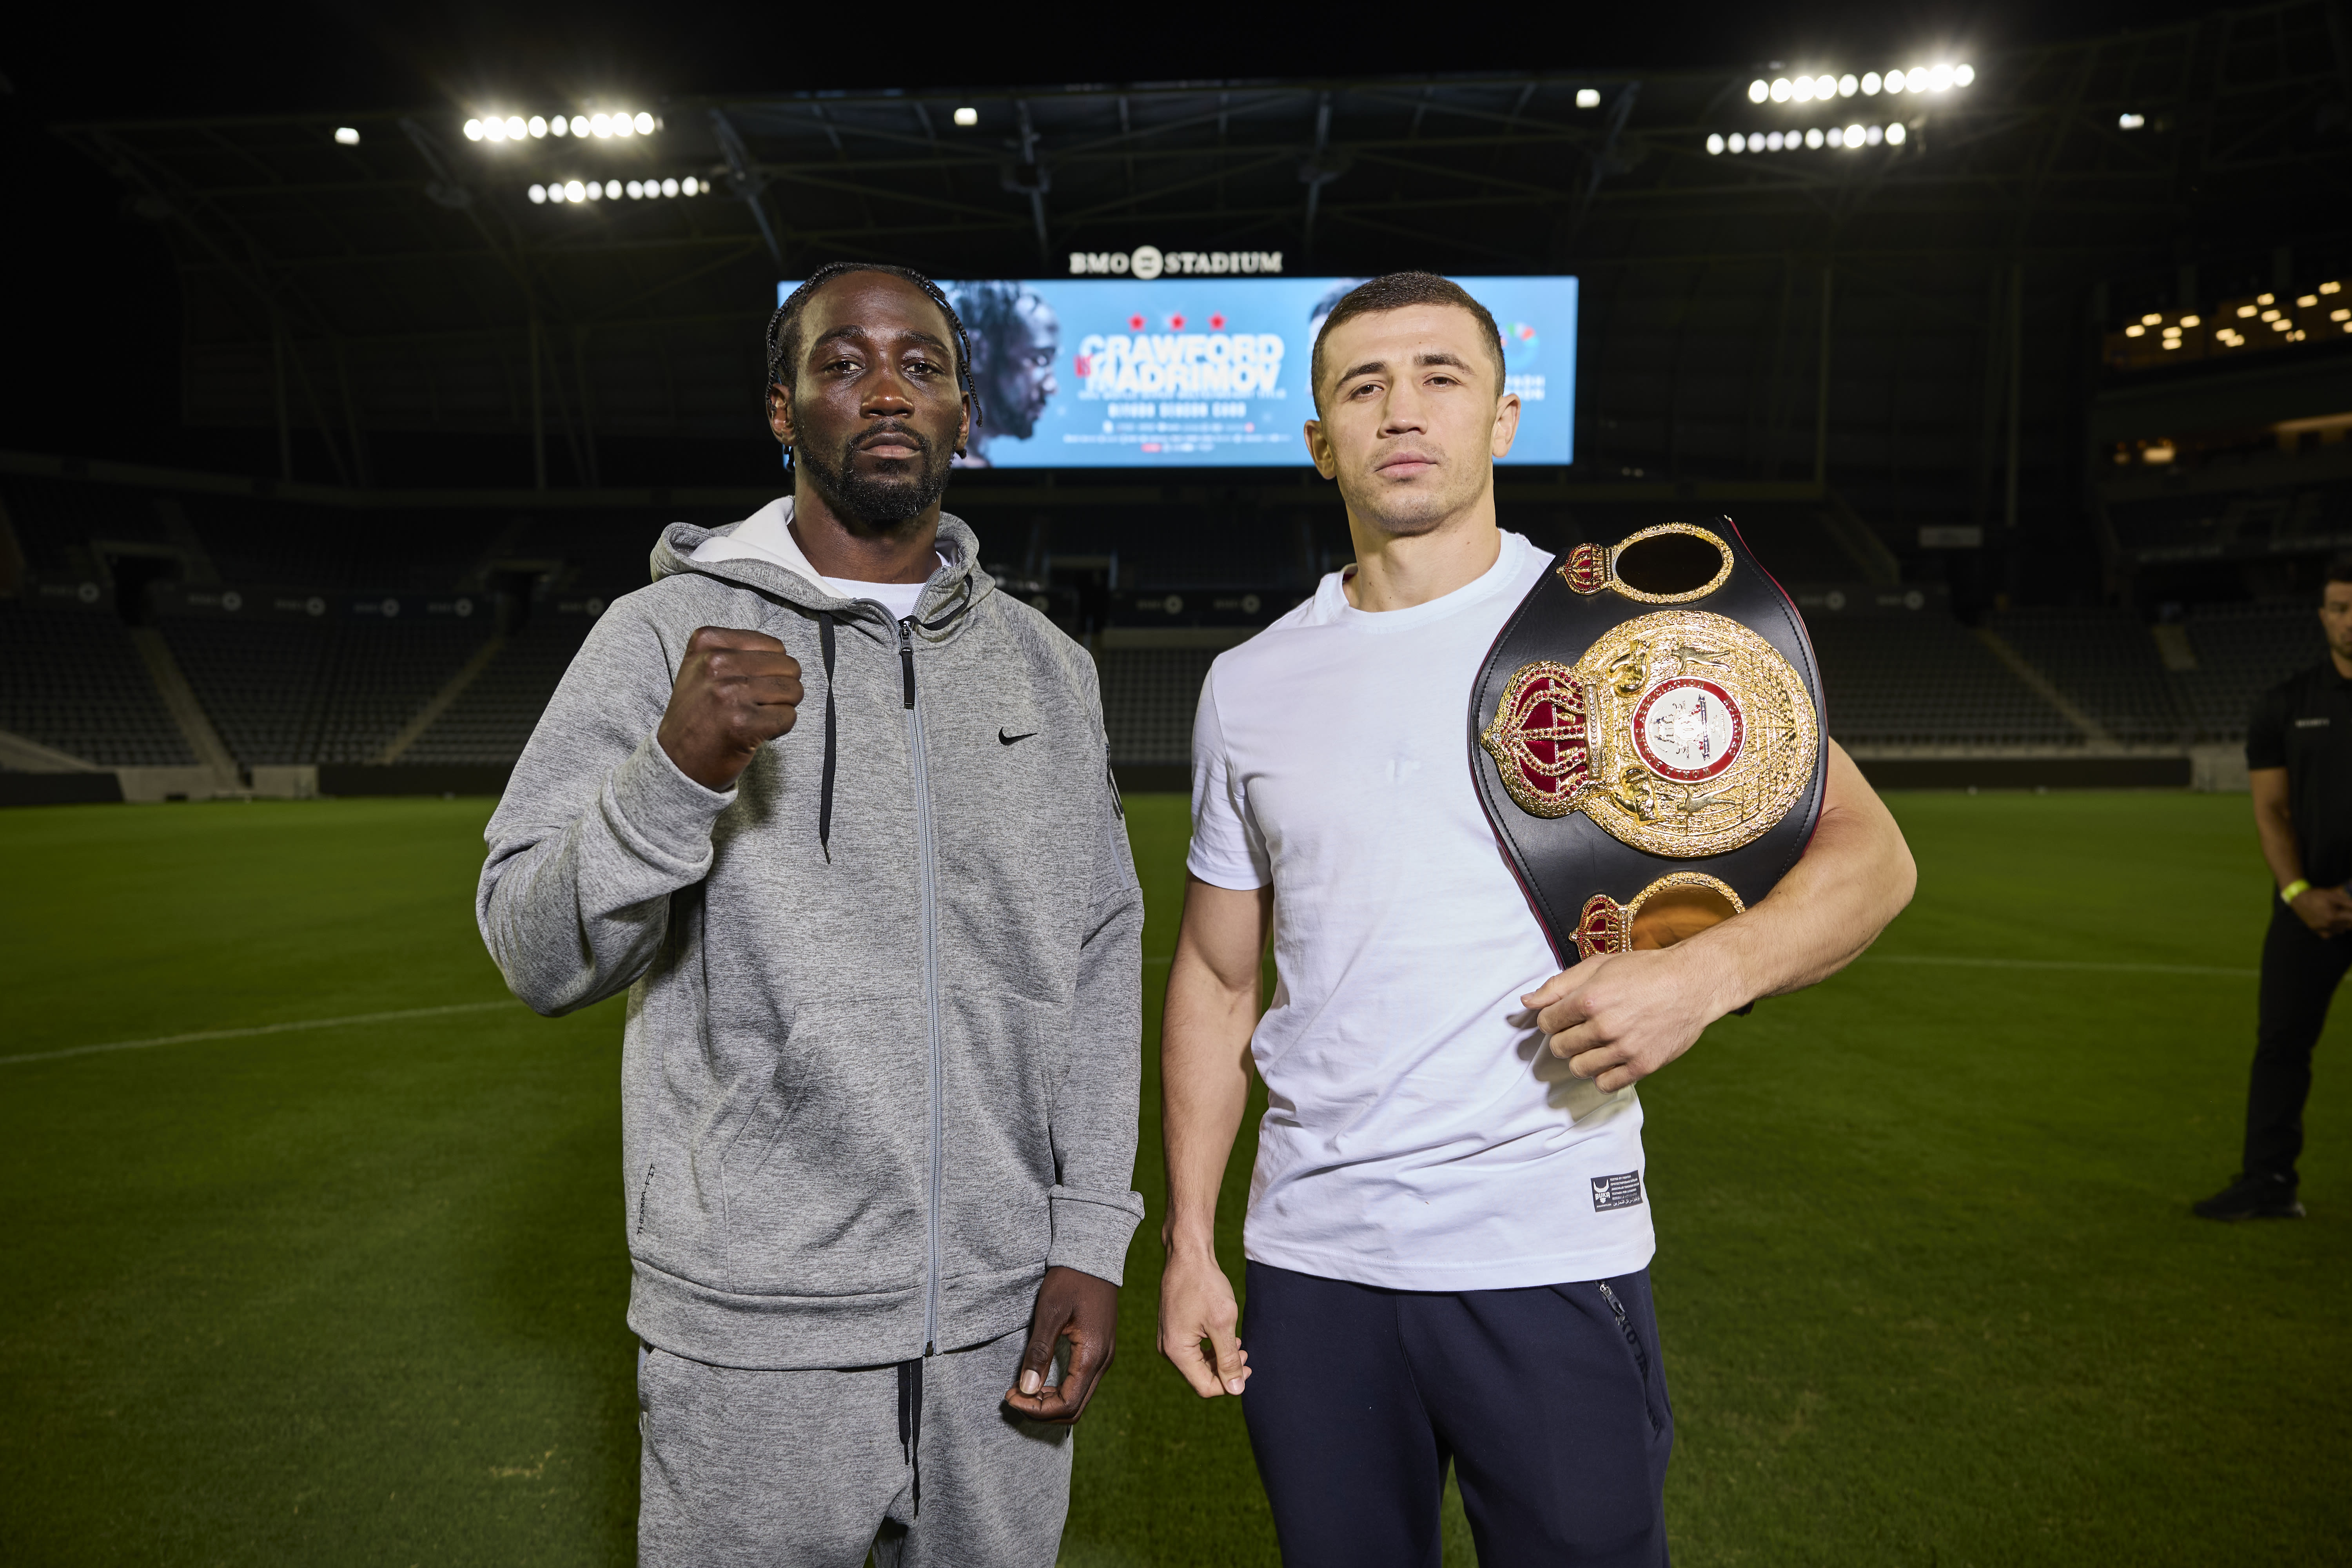 How to watch the Terence Crawford vs. Israil Madrimov fight: Full card, where to stream for less and more